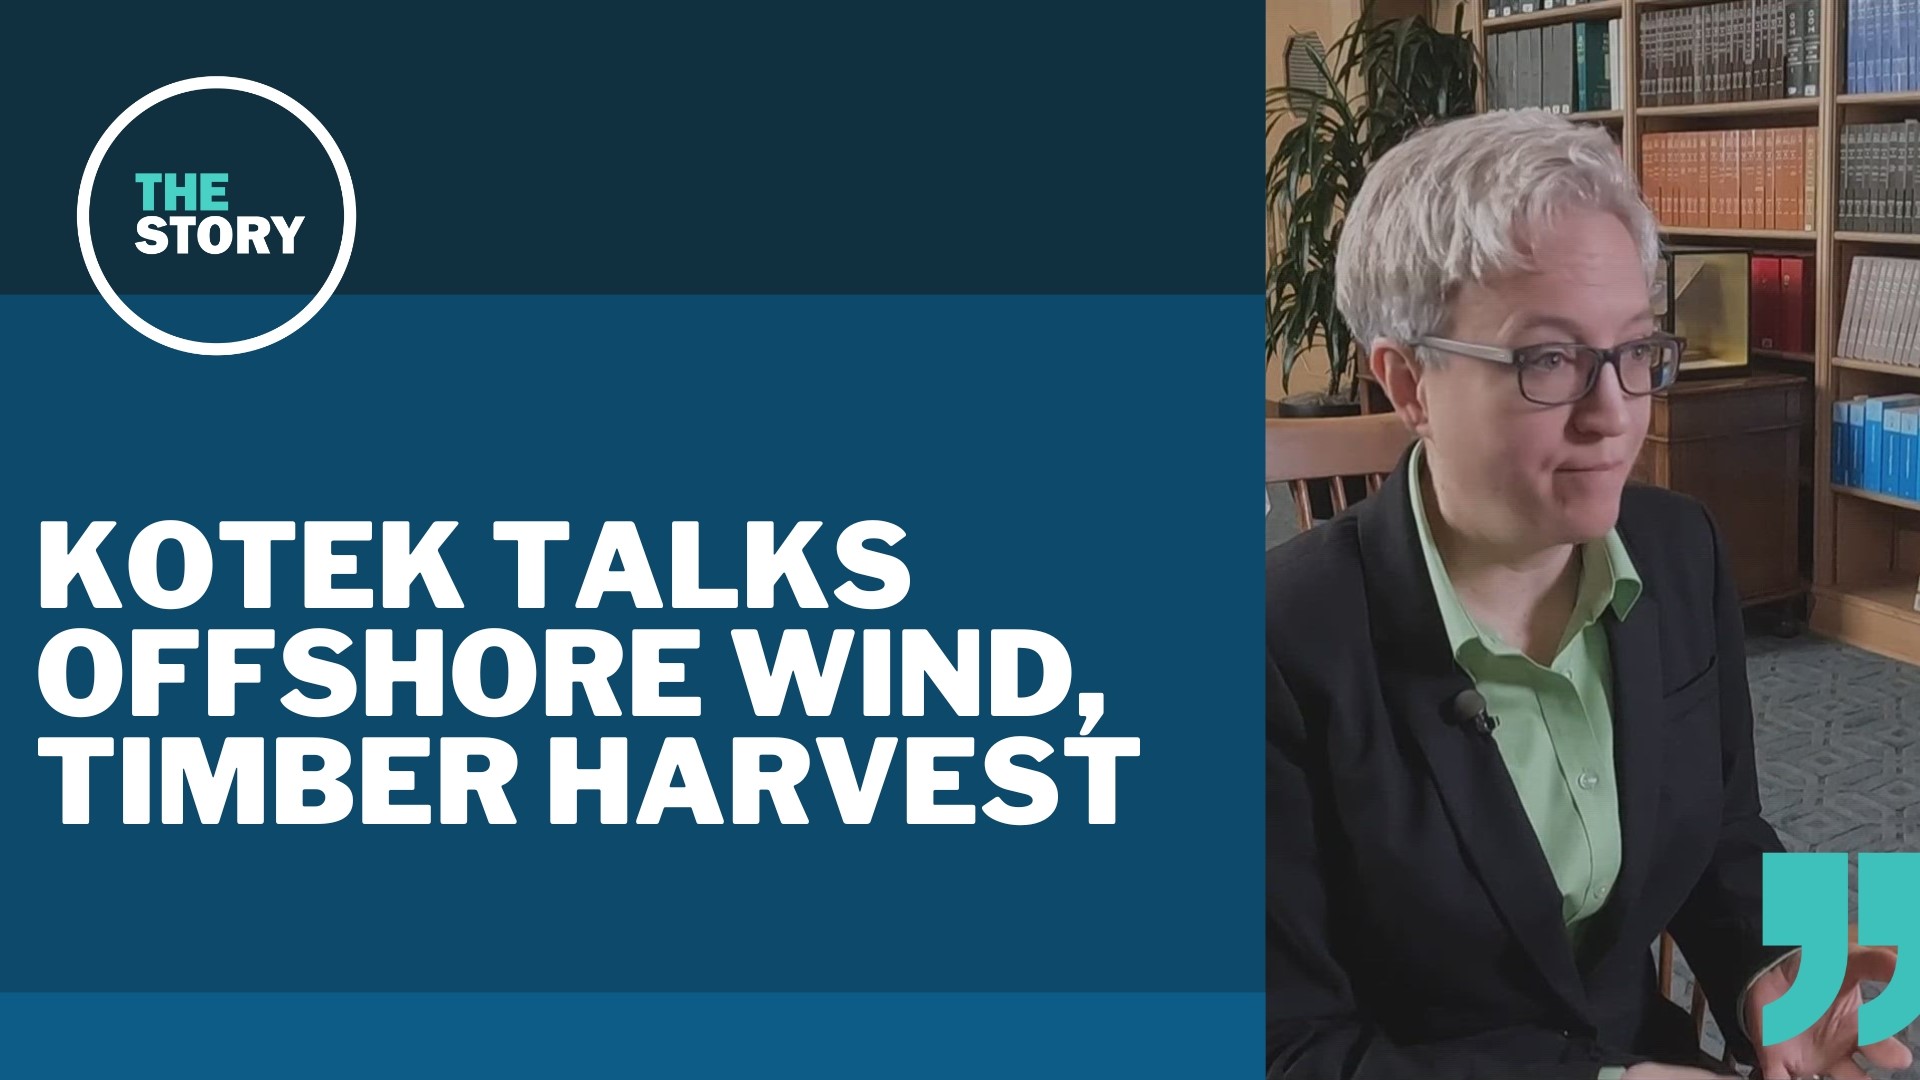 The state is taking on two challenges that have stirred up quite a bit of pushback: offshore wind development and a change to the way timber is harvested.